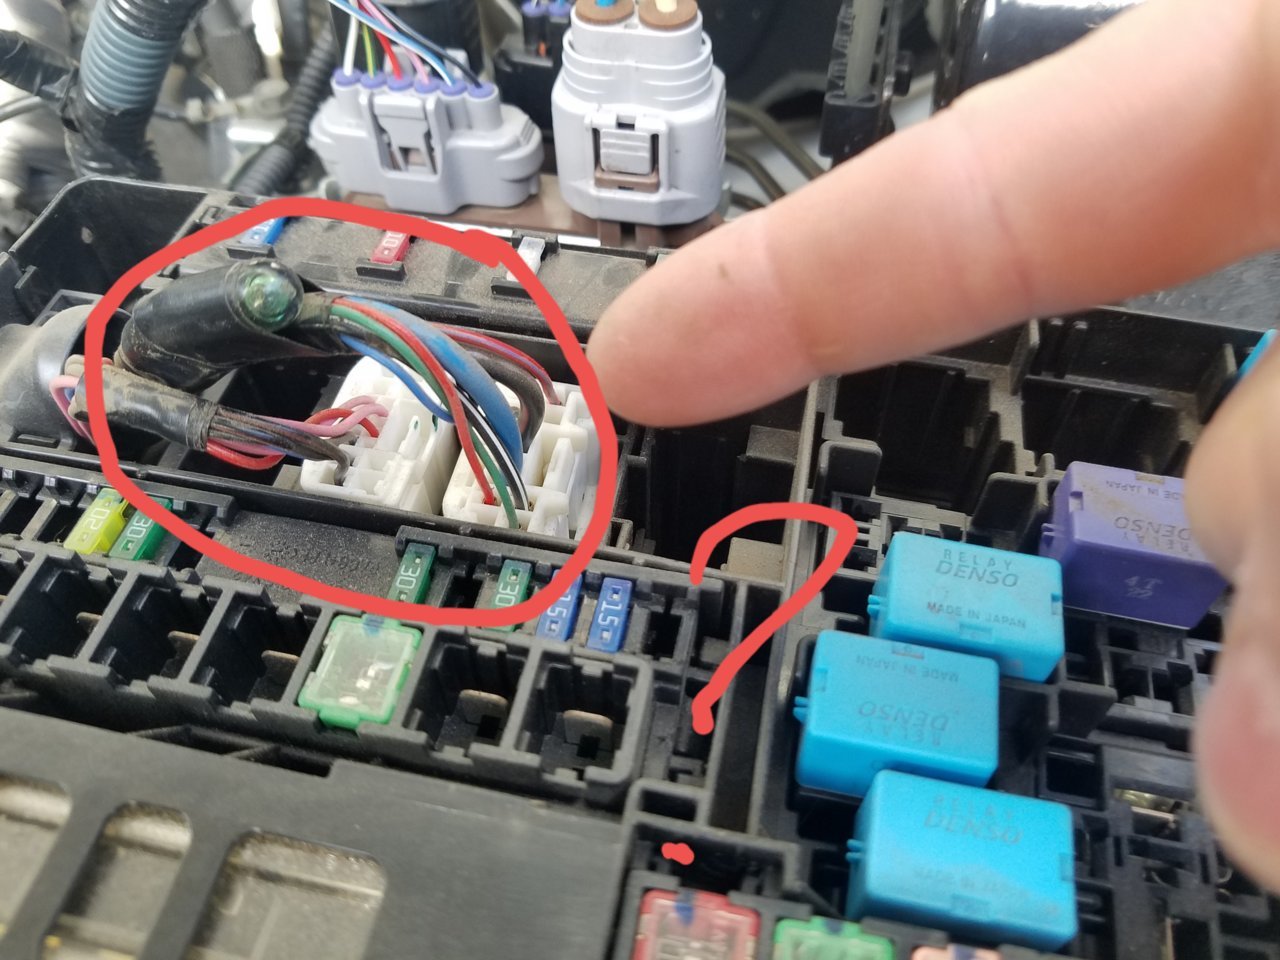 What is this? | Toyota Tundra Forum